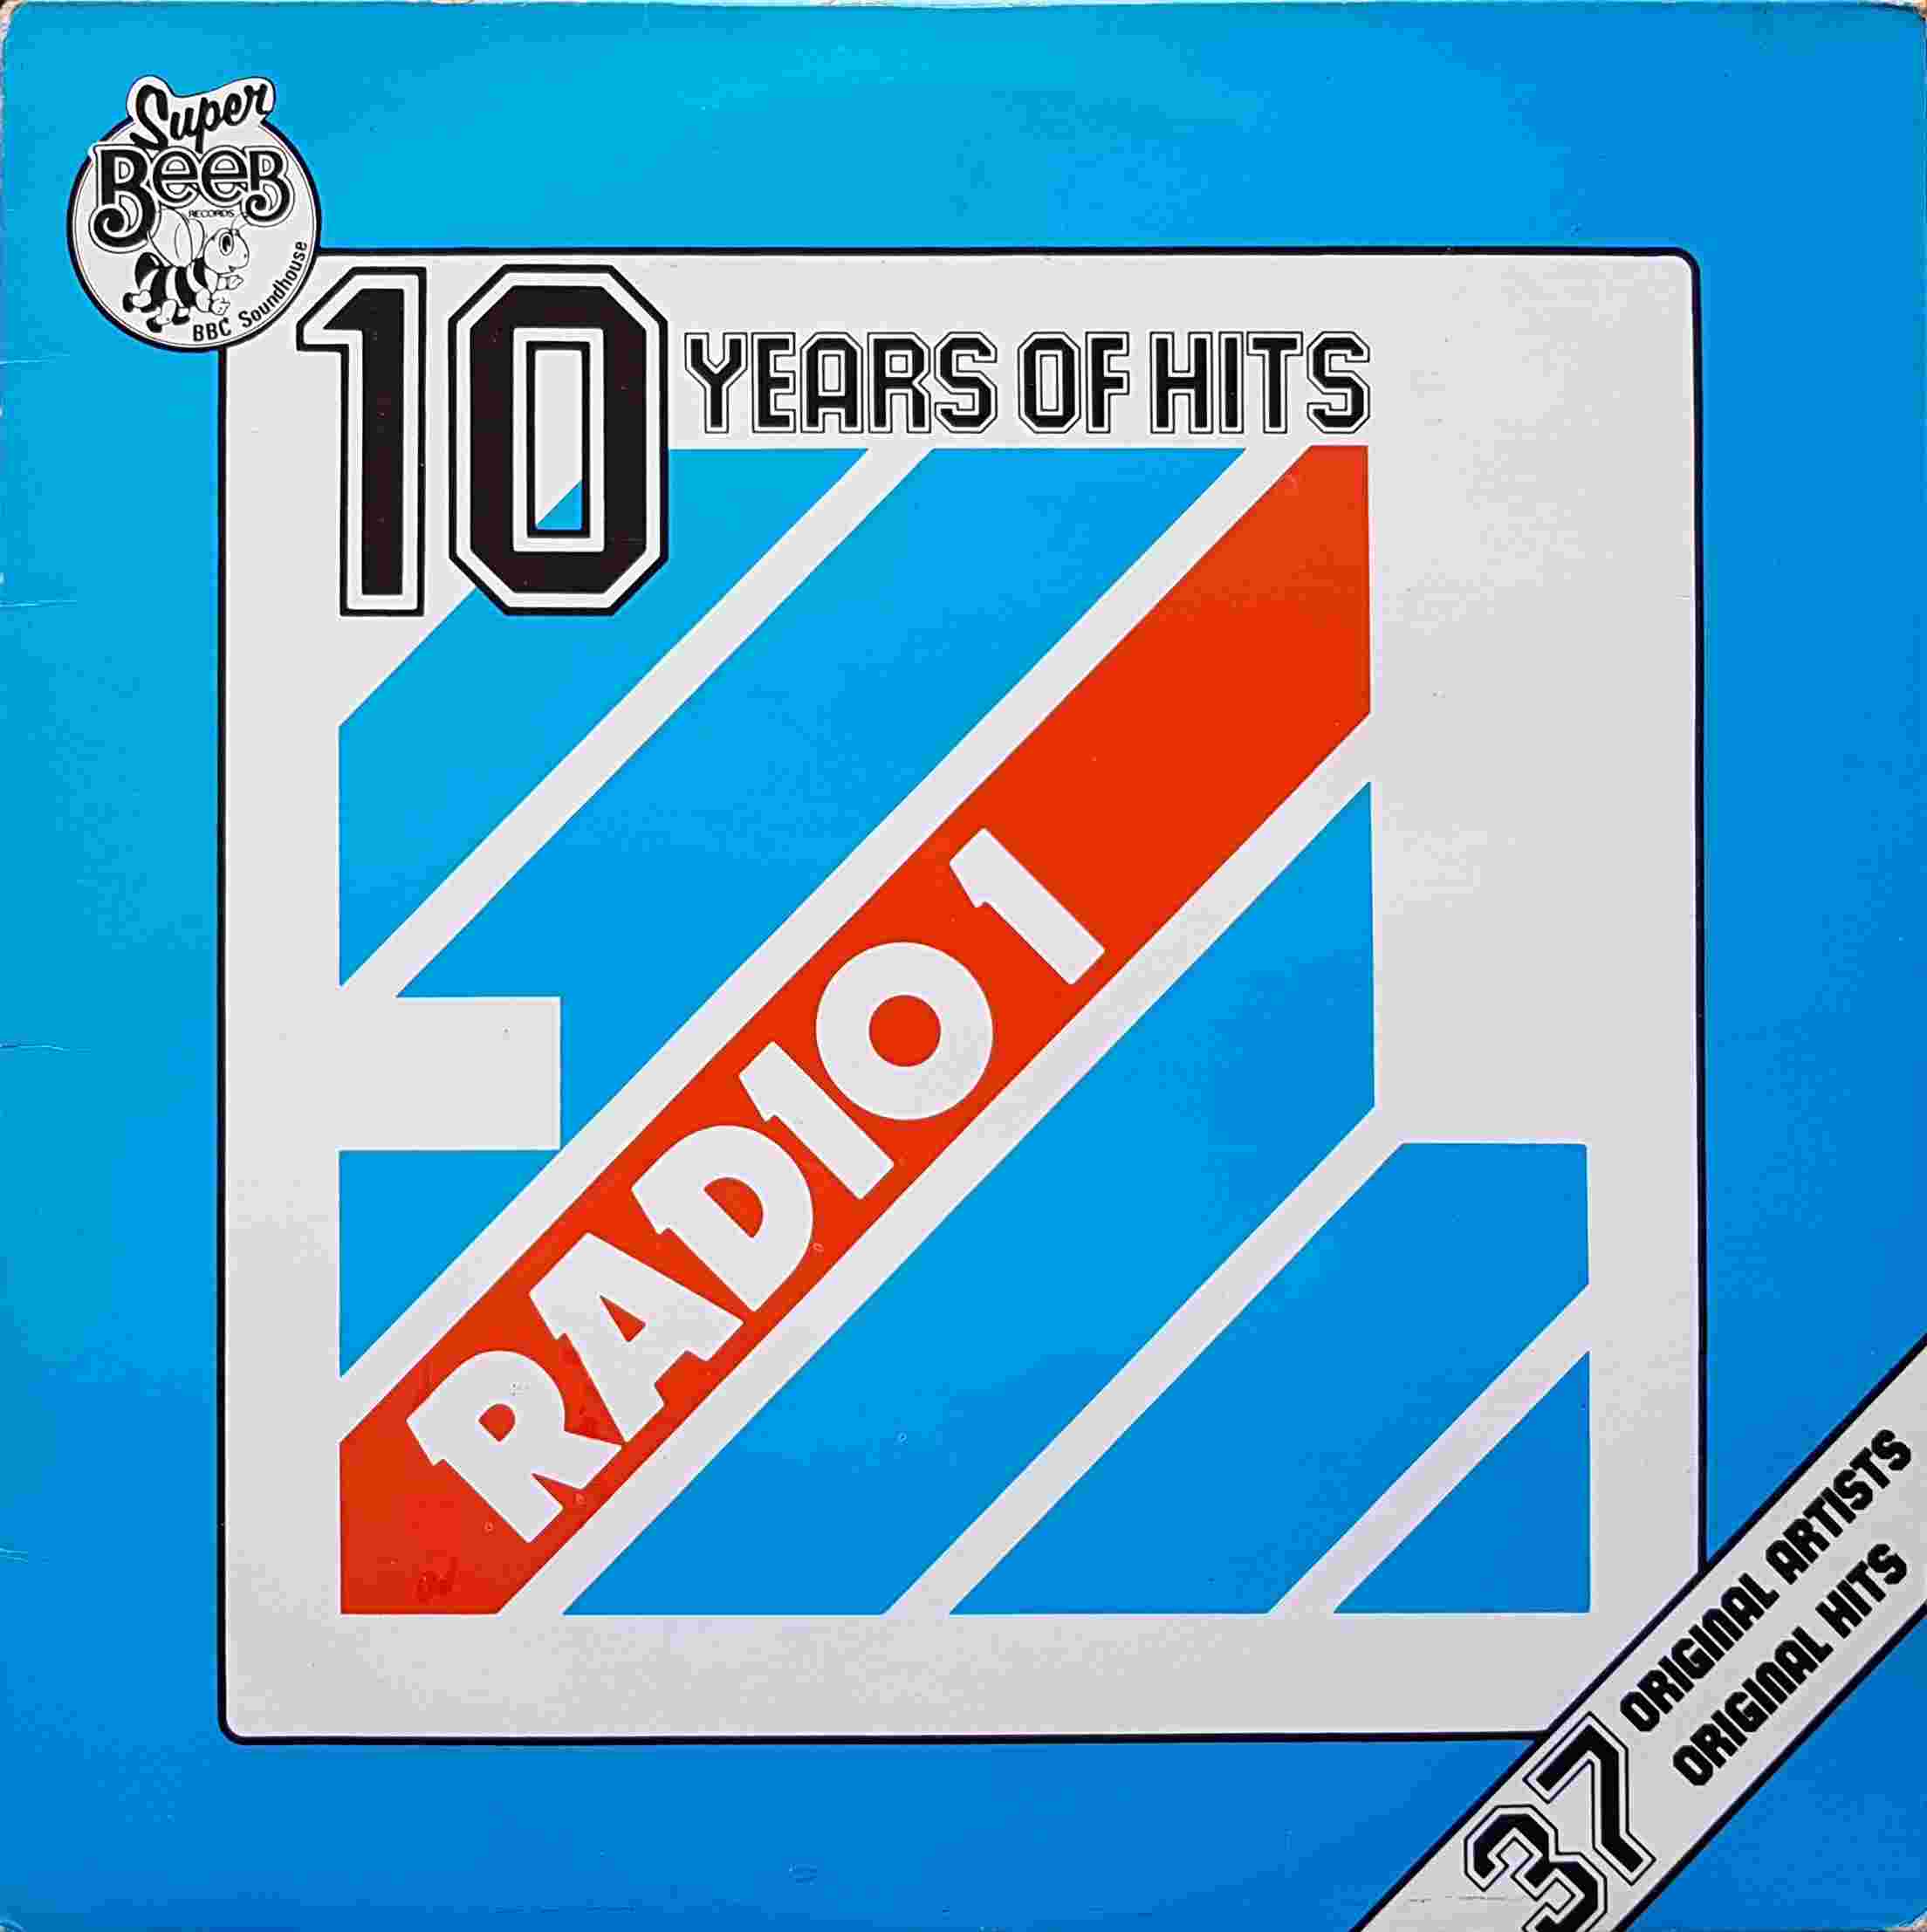 Picture of BEDP 002 10 years of hits - Radio 1 volume 1 by artist Various from the BBC albums - Records and Tapes library